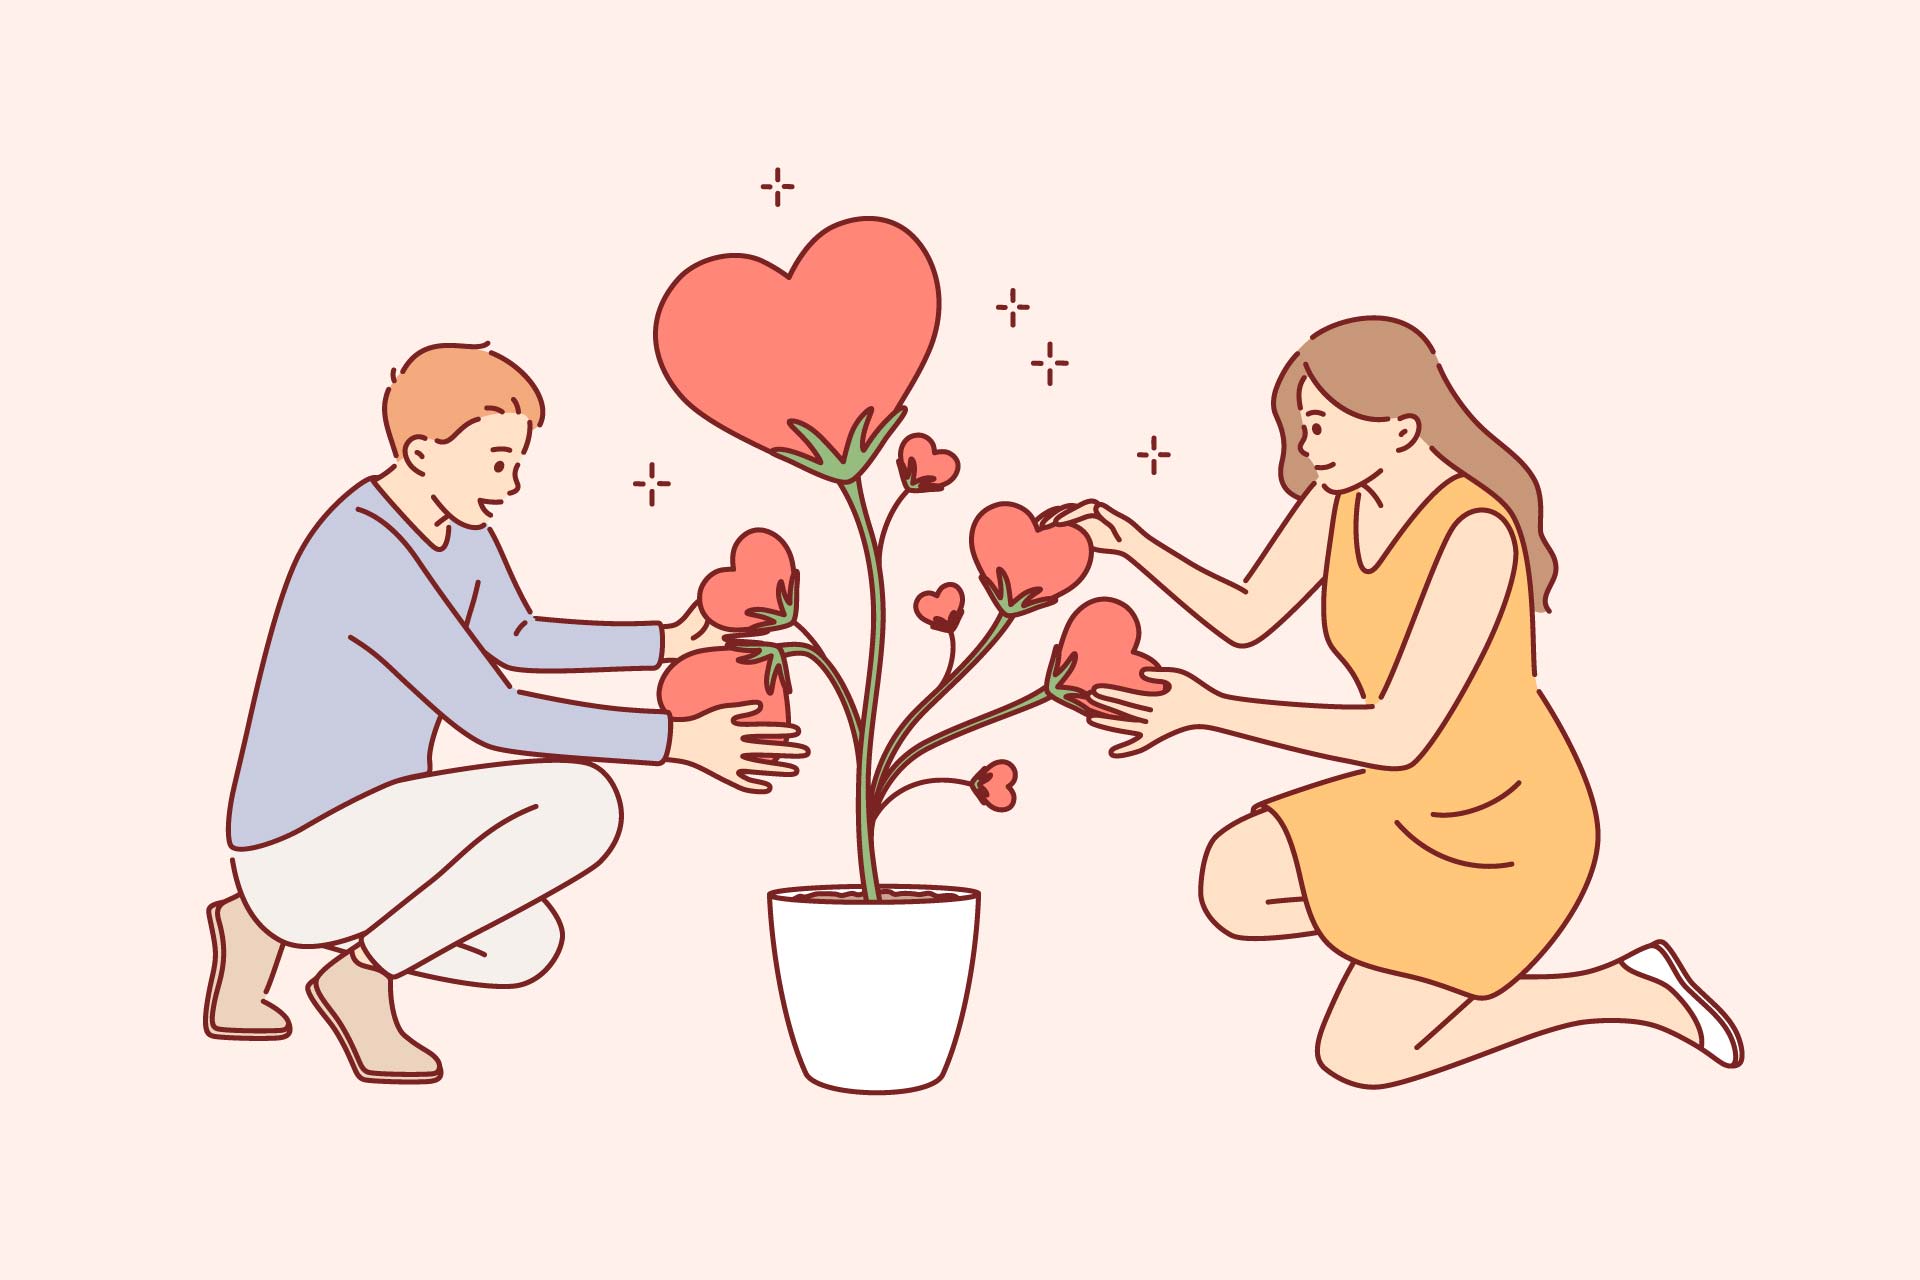 Cartoon man and woman kneeling down with a flower pot between them growing blooms in the shape of love hearts.